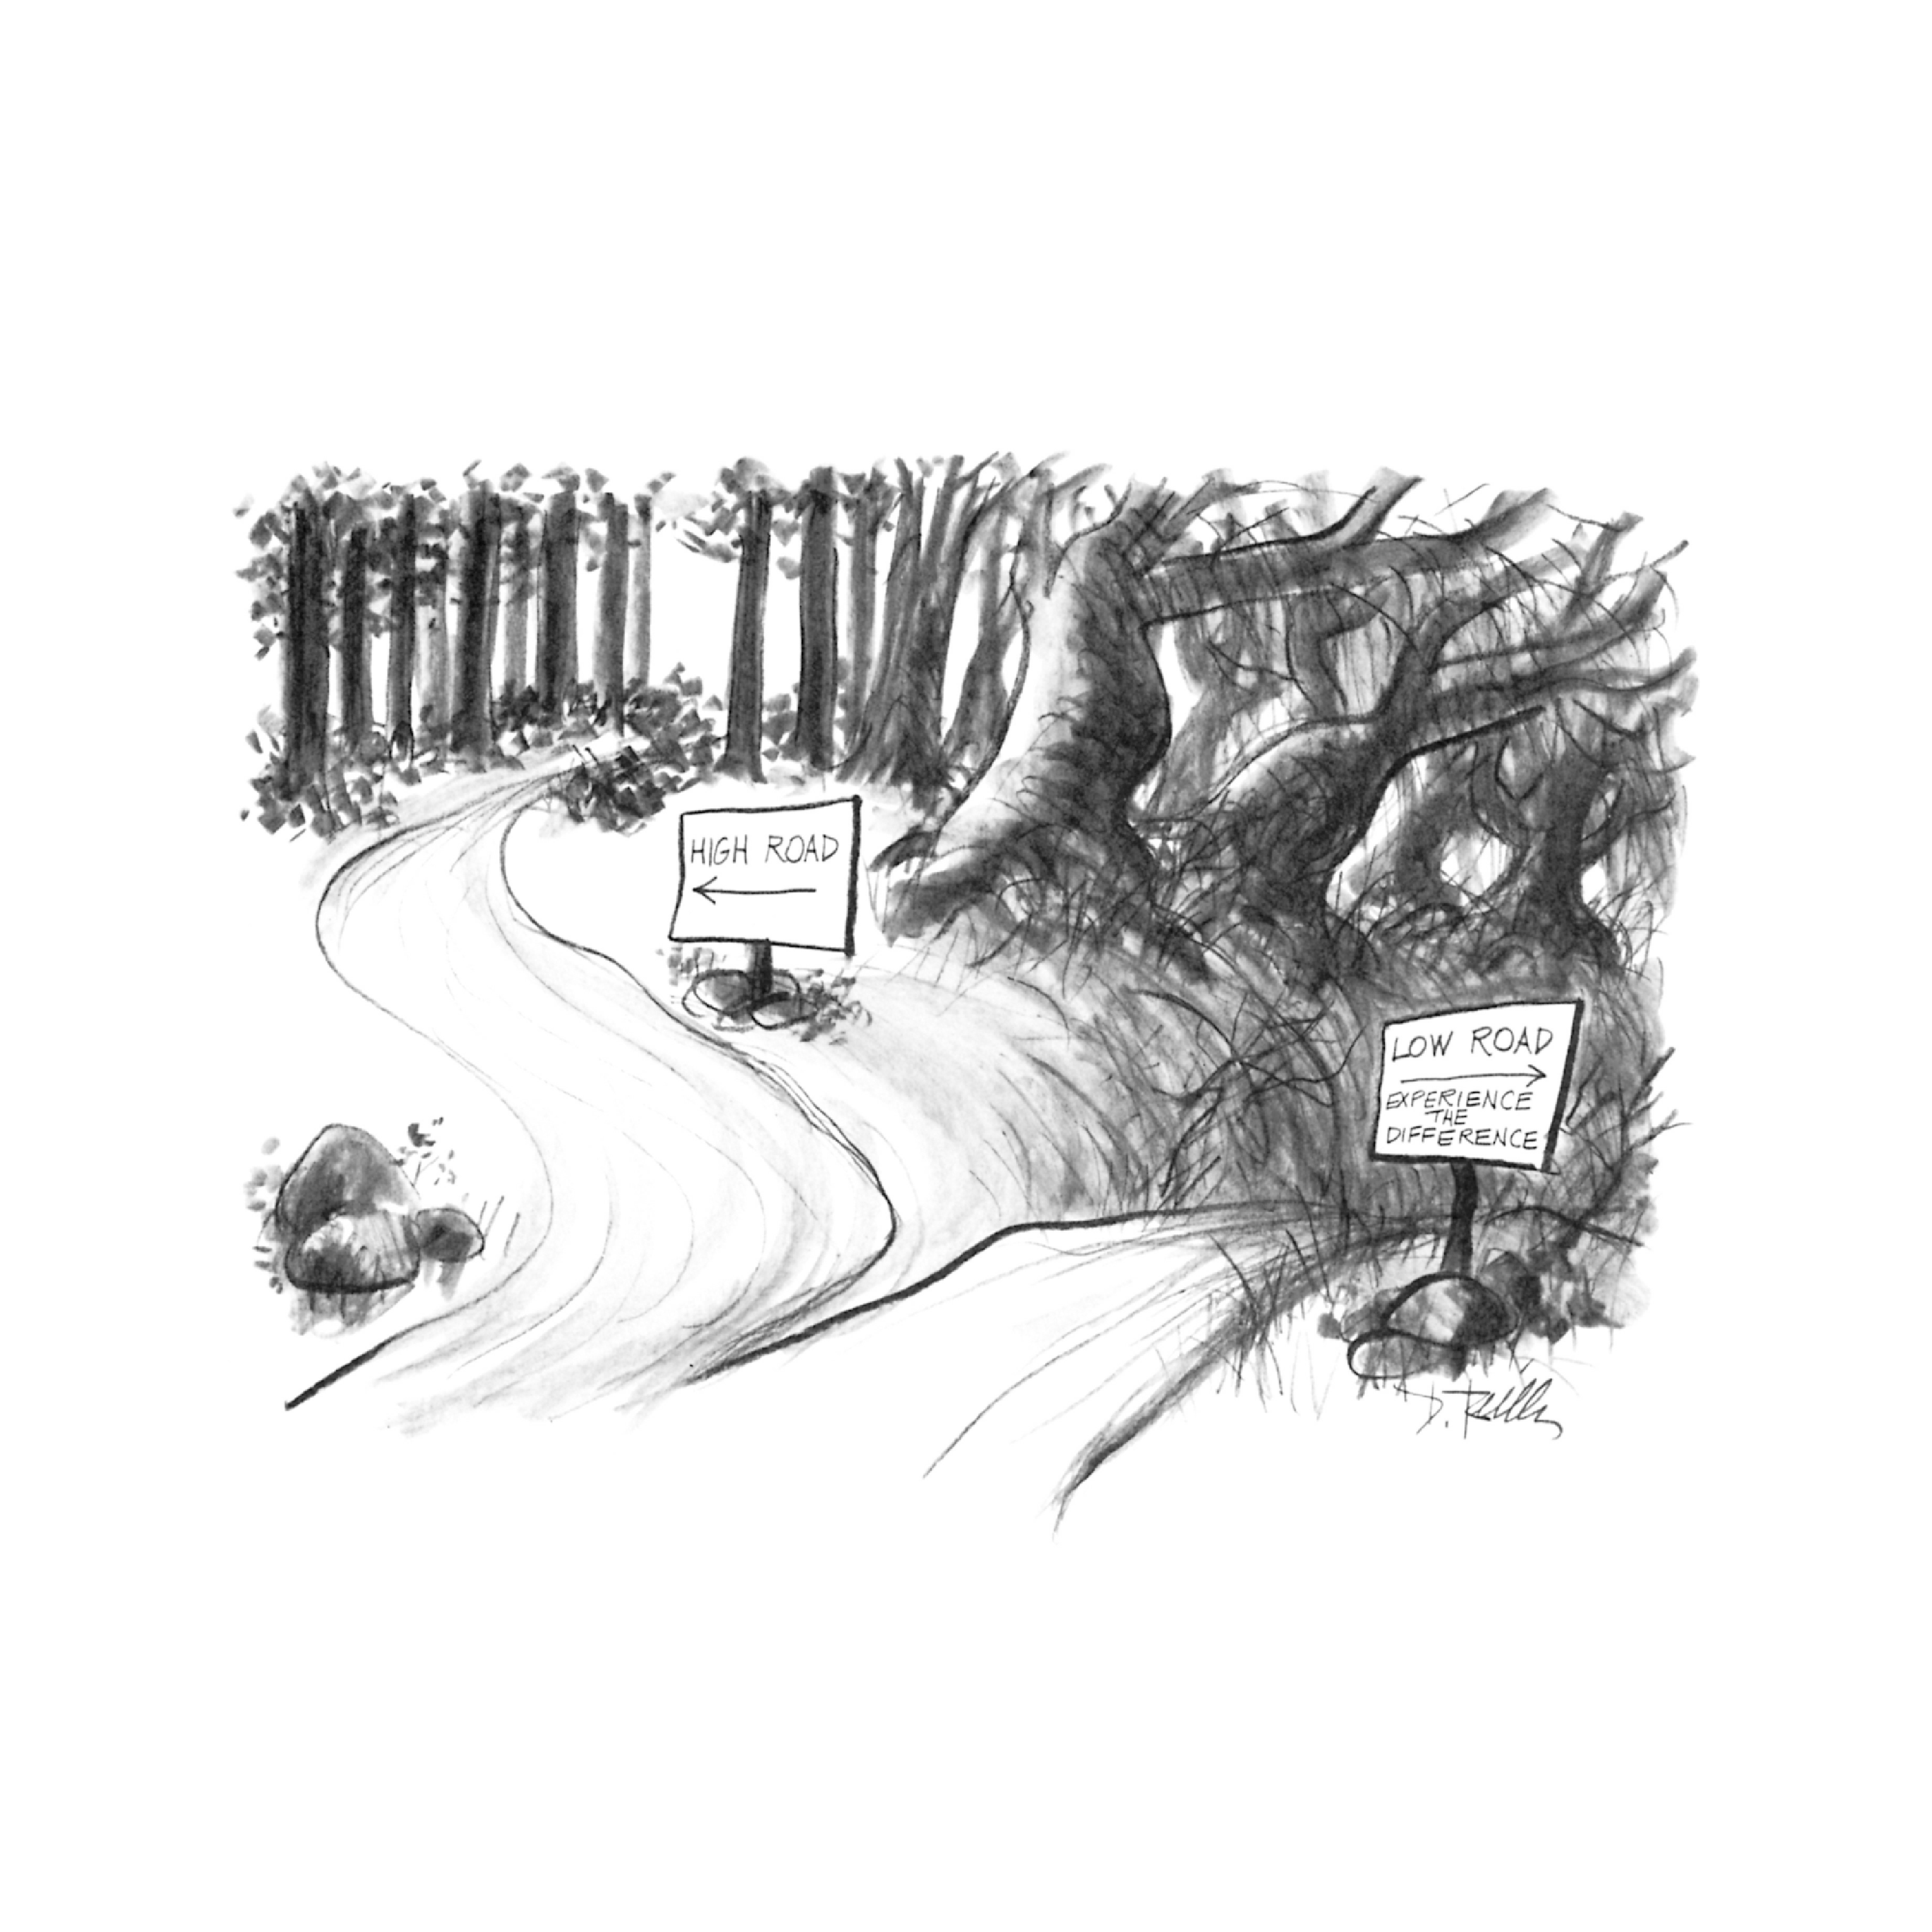 Cover image for  article: The Low Road or the High Road for Ad Agencies?